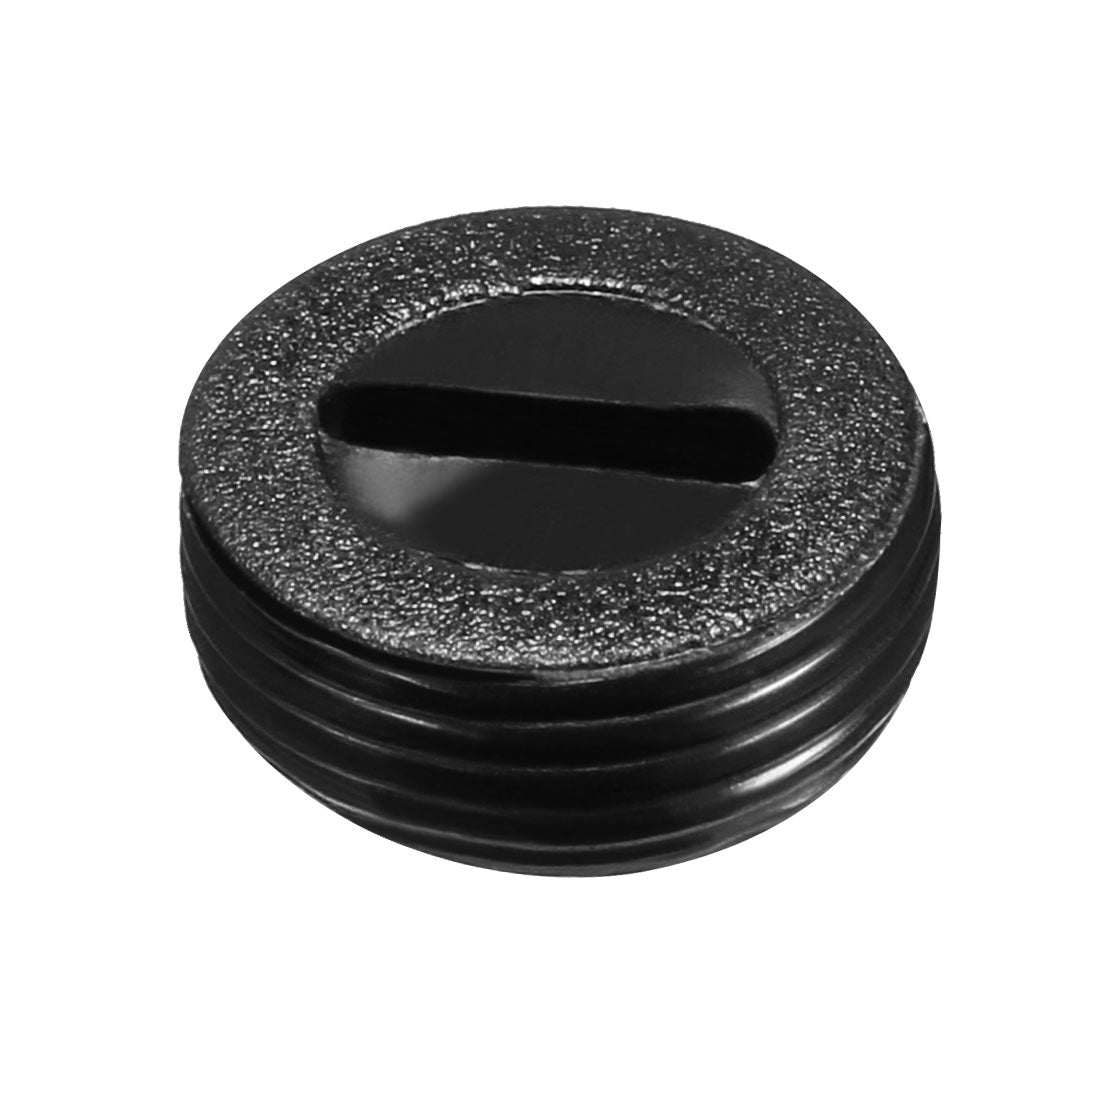 uxcell Uxcell Carbon Brush Holder Caps 13mm O.D. 7mm I.D. 5mm Thickness Motor Brush Cover Plastic Fitting Thread Black 20pcs